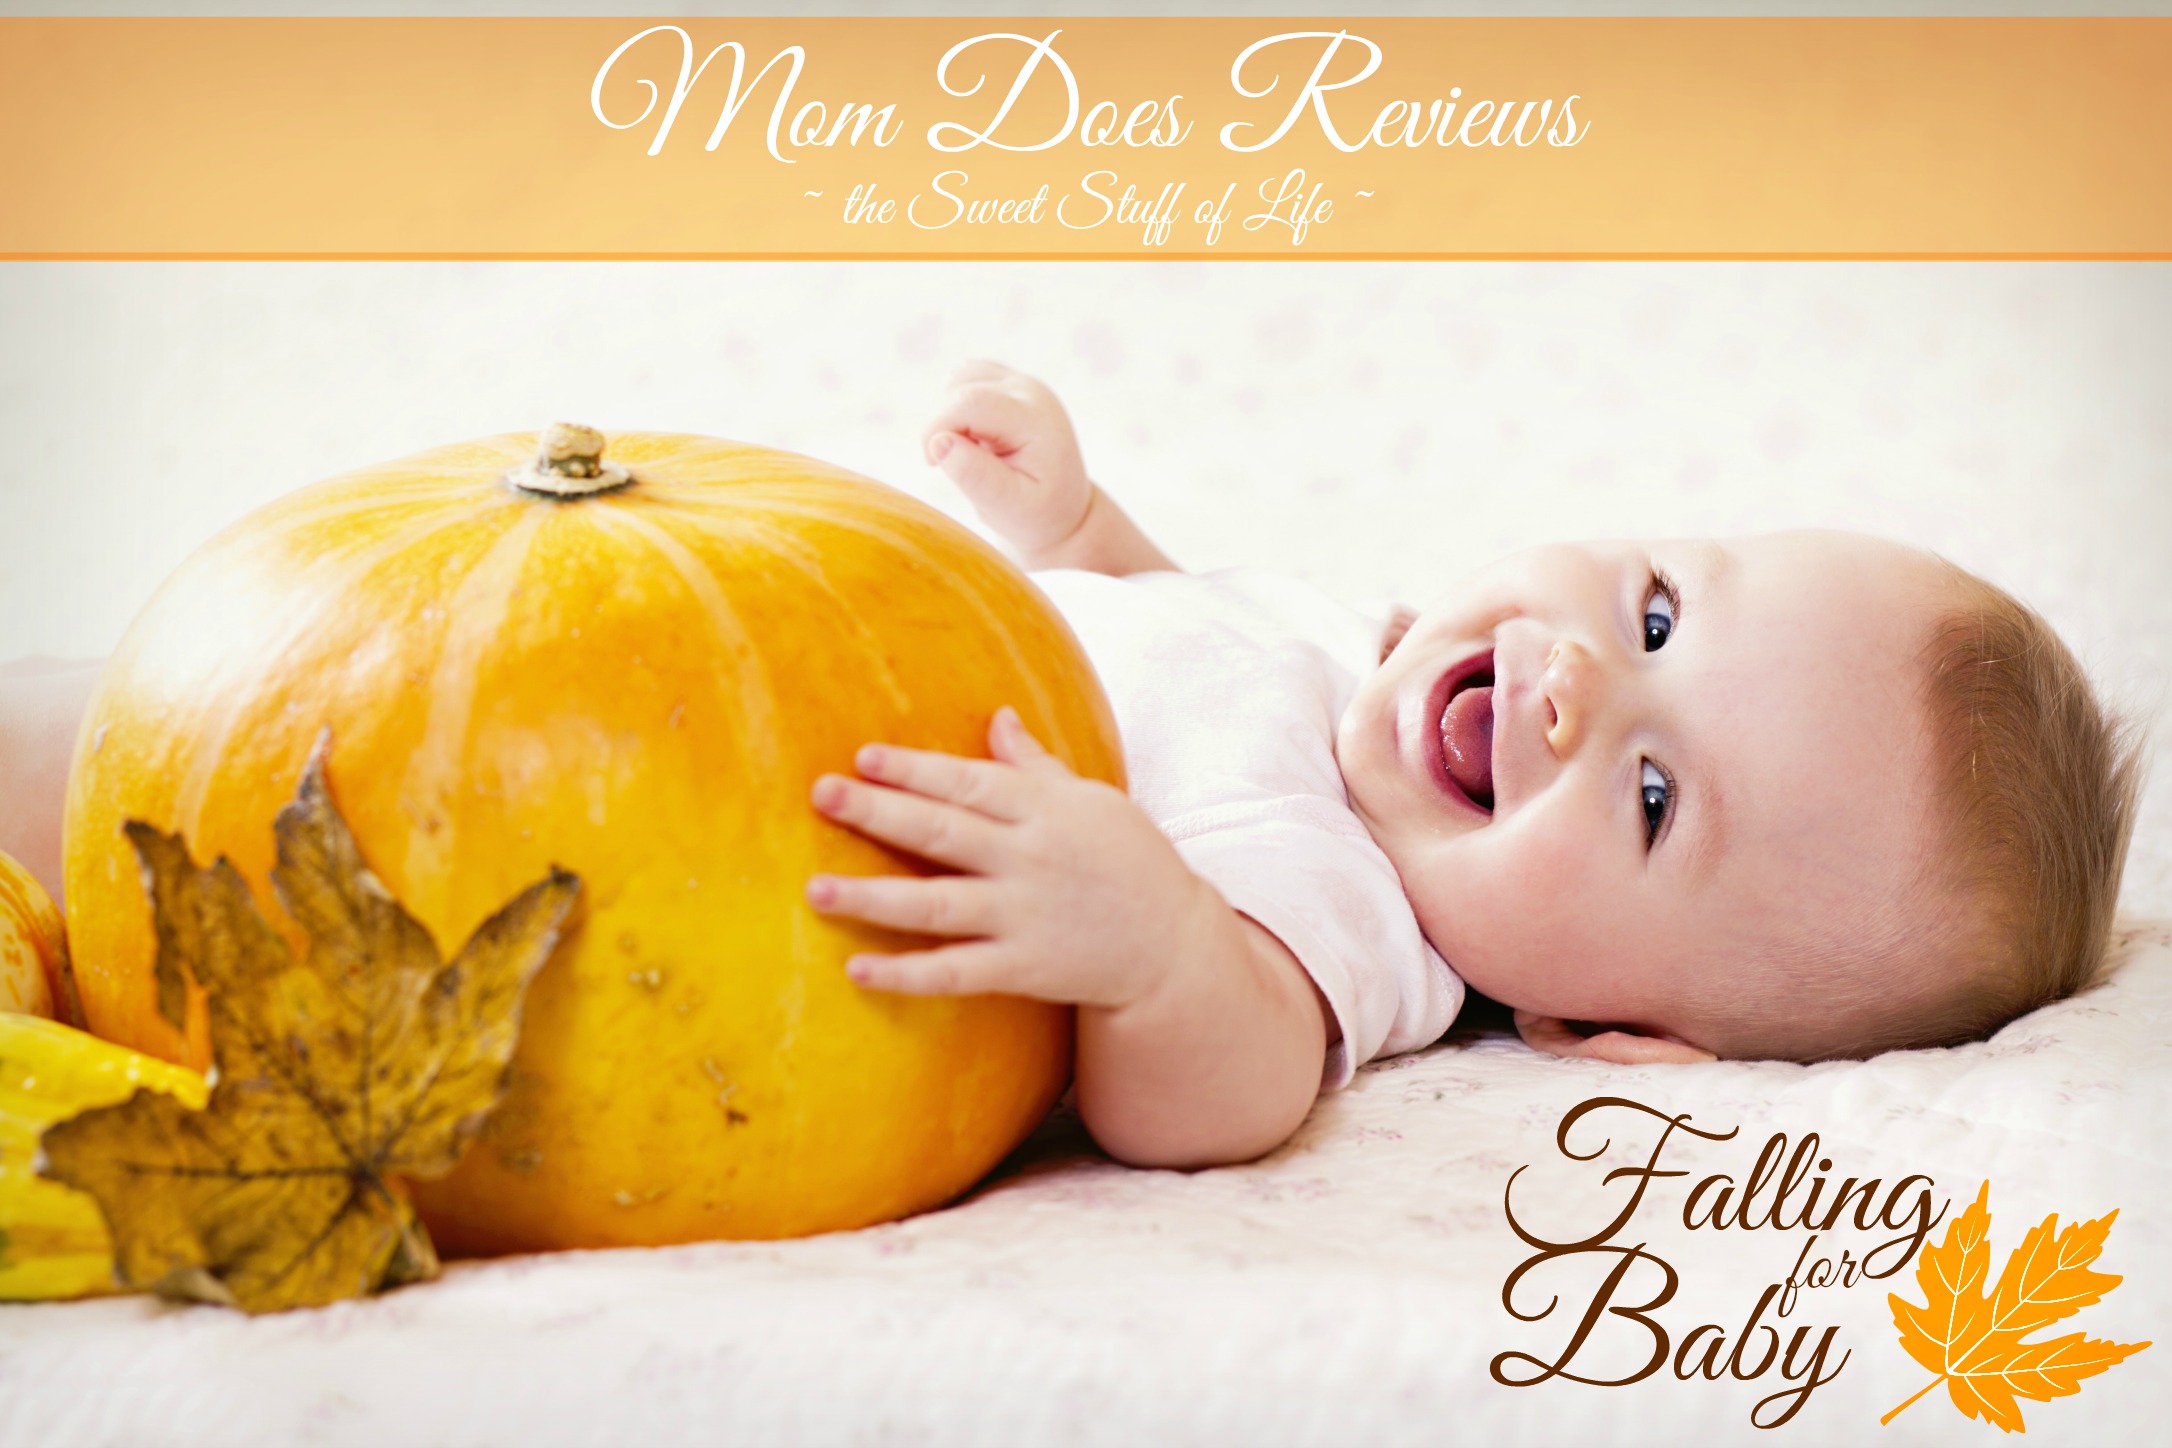 Mom Does Reviews is having a baby! Coming Soon this fall, 2014, Mom Does Reviews is Falling for Baby! #MomDoesReviews #BabyReviews #BabyGiveaways